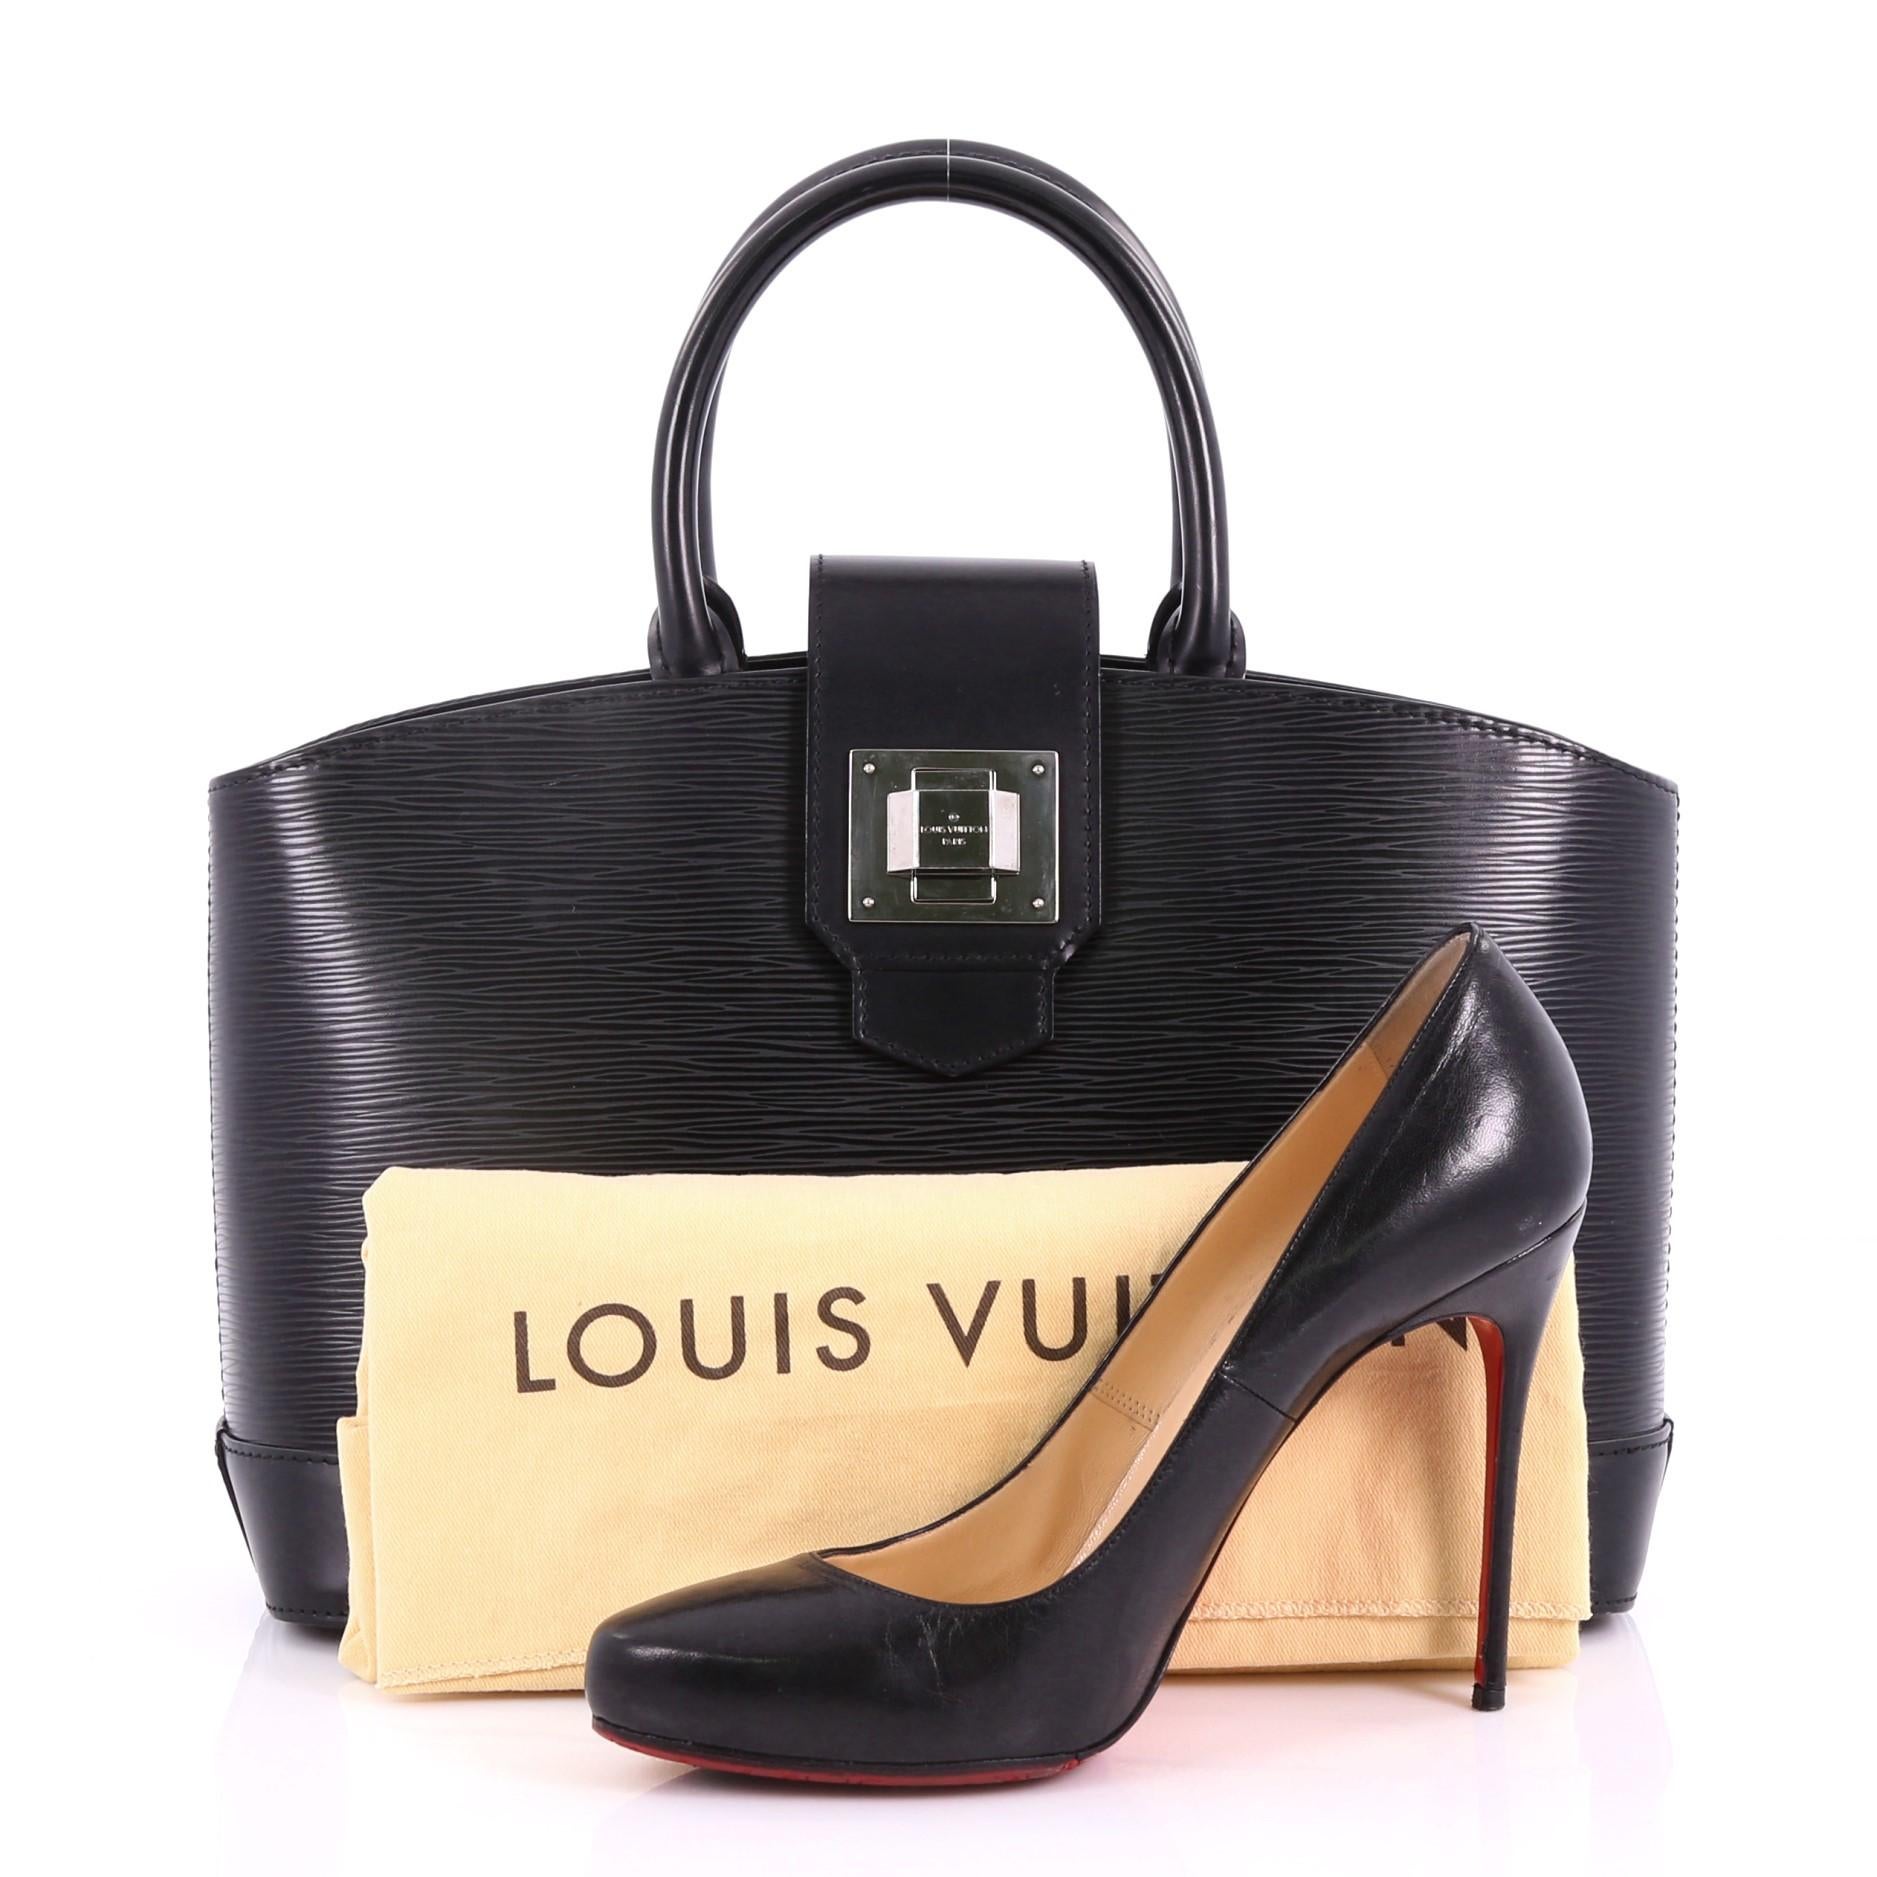 This Louis Vuitton Mirabeau Handbag Epi Leather PM, crafted from black epi leather, features dual rolled top handles, protective base studs and silver-tone hardware. Its turn-lock closure opens to a black microfiber interior with side zip and slip